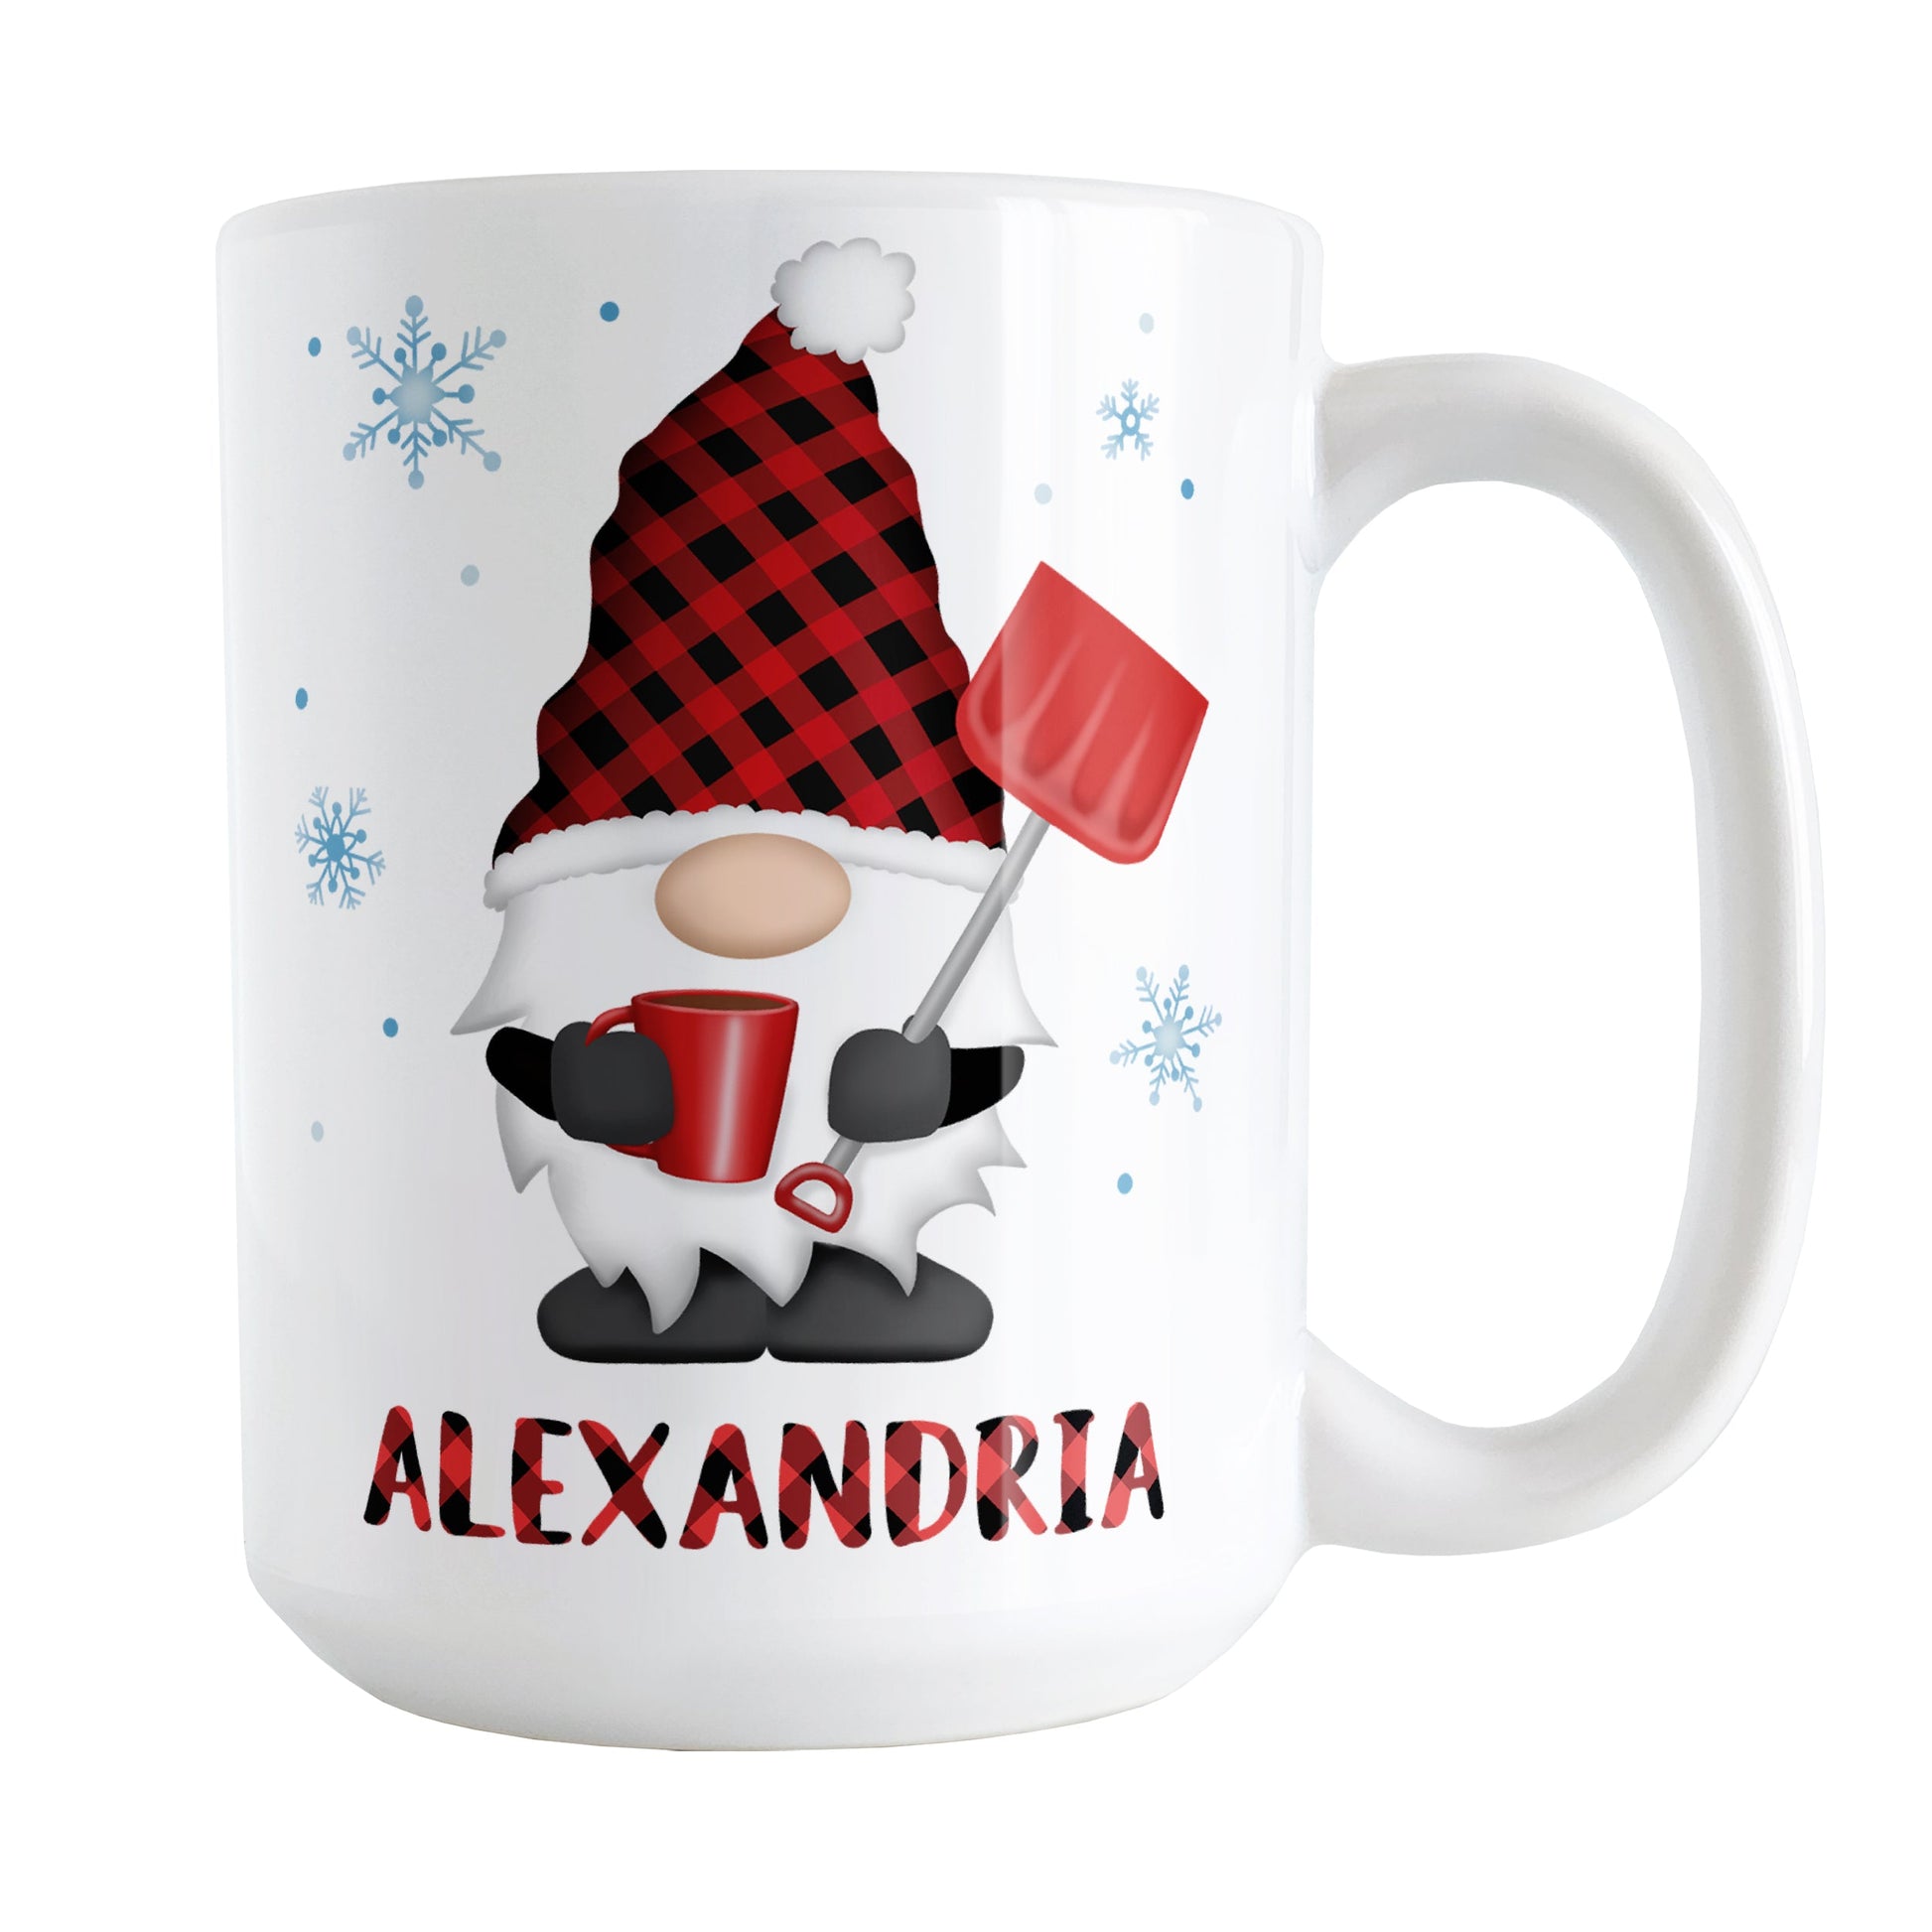 Personalized Red Buffalo Plaid Gnome Mug (15oz) at Amy's Coffee Mugs. A ceramic coffee mug designed with a gnome with a red and black buffalo plaid pattern hat and holding a hot beverage and snow shovel with snowflakes around it. This cute buffalo plaid gnome illustration, along with your name personalized in buffalo plaid below the gnome, is on both sides of the mug. 